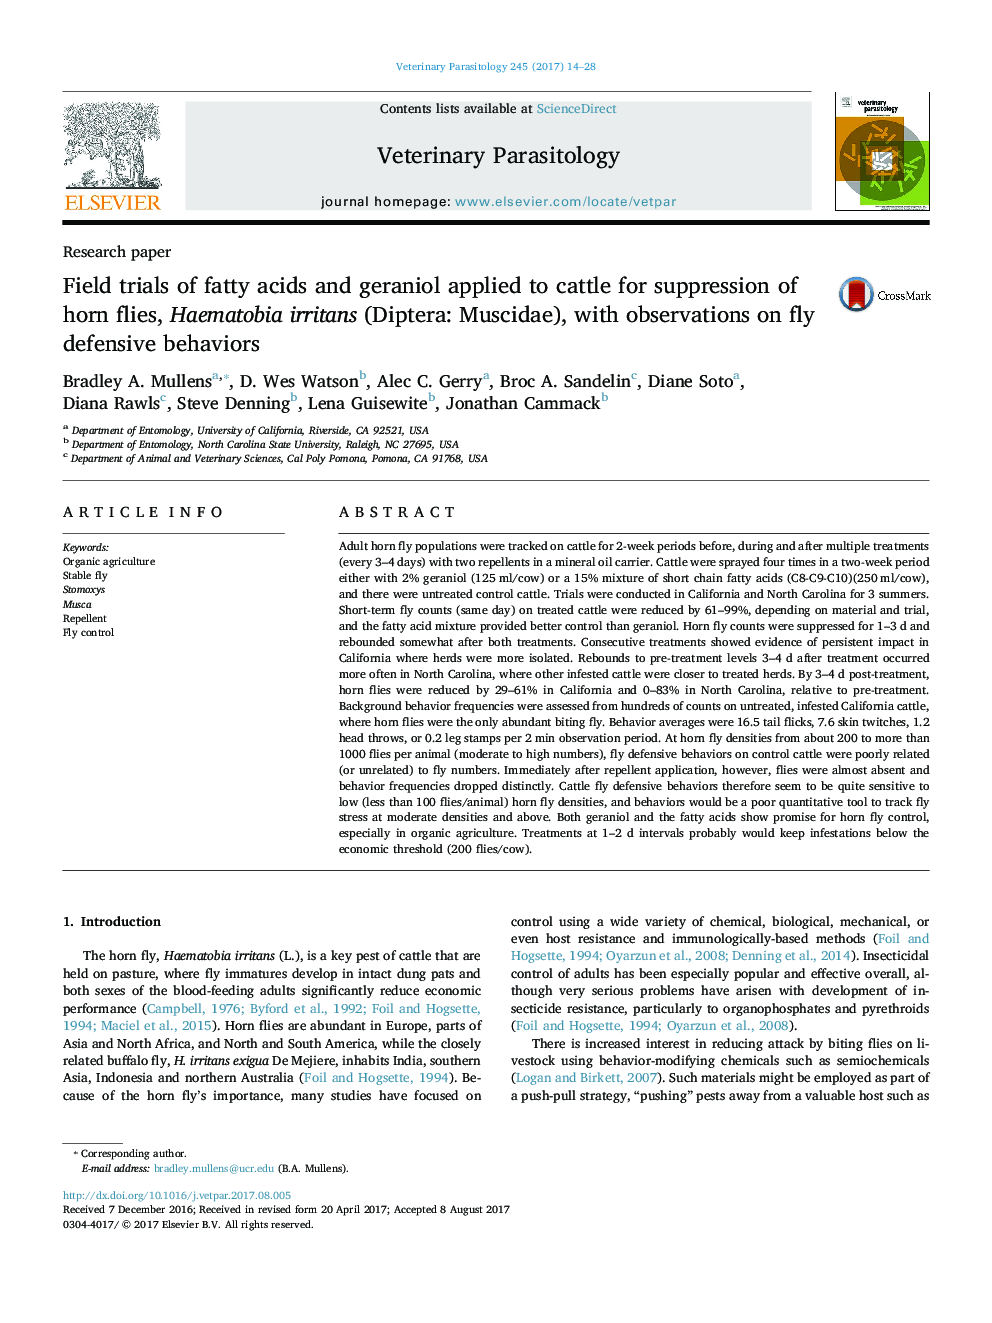 Field trials of fatty acids and geraniol applied to cattle for suppression of horn flies, Haematobia irritans (Diptera: Muscidae), with observations on fly defensive behaviors